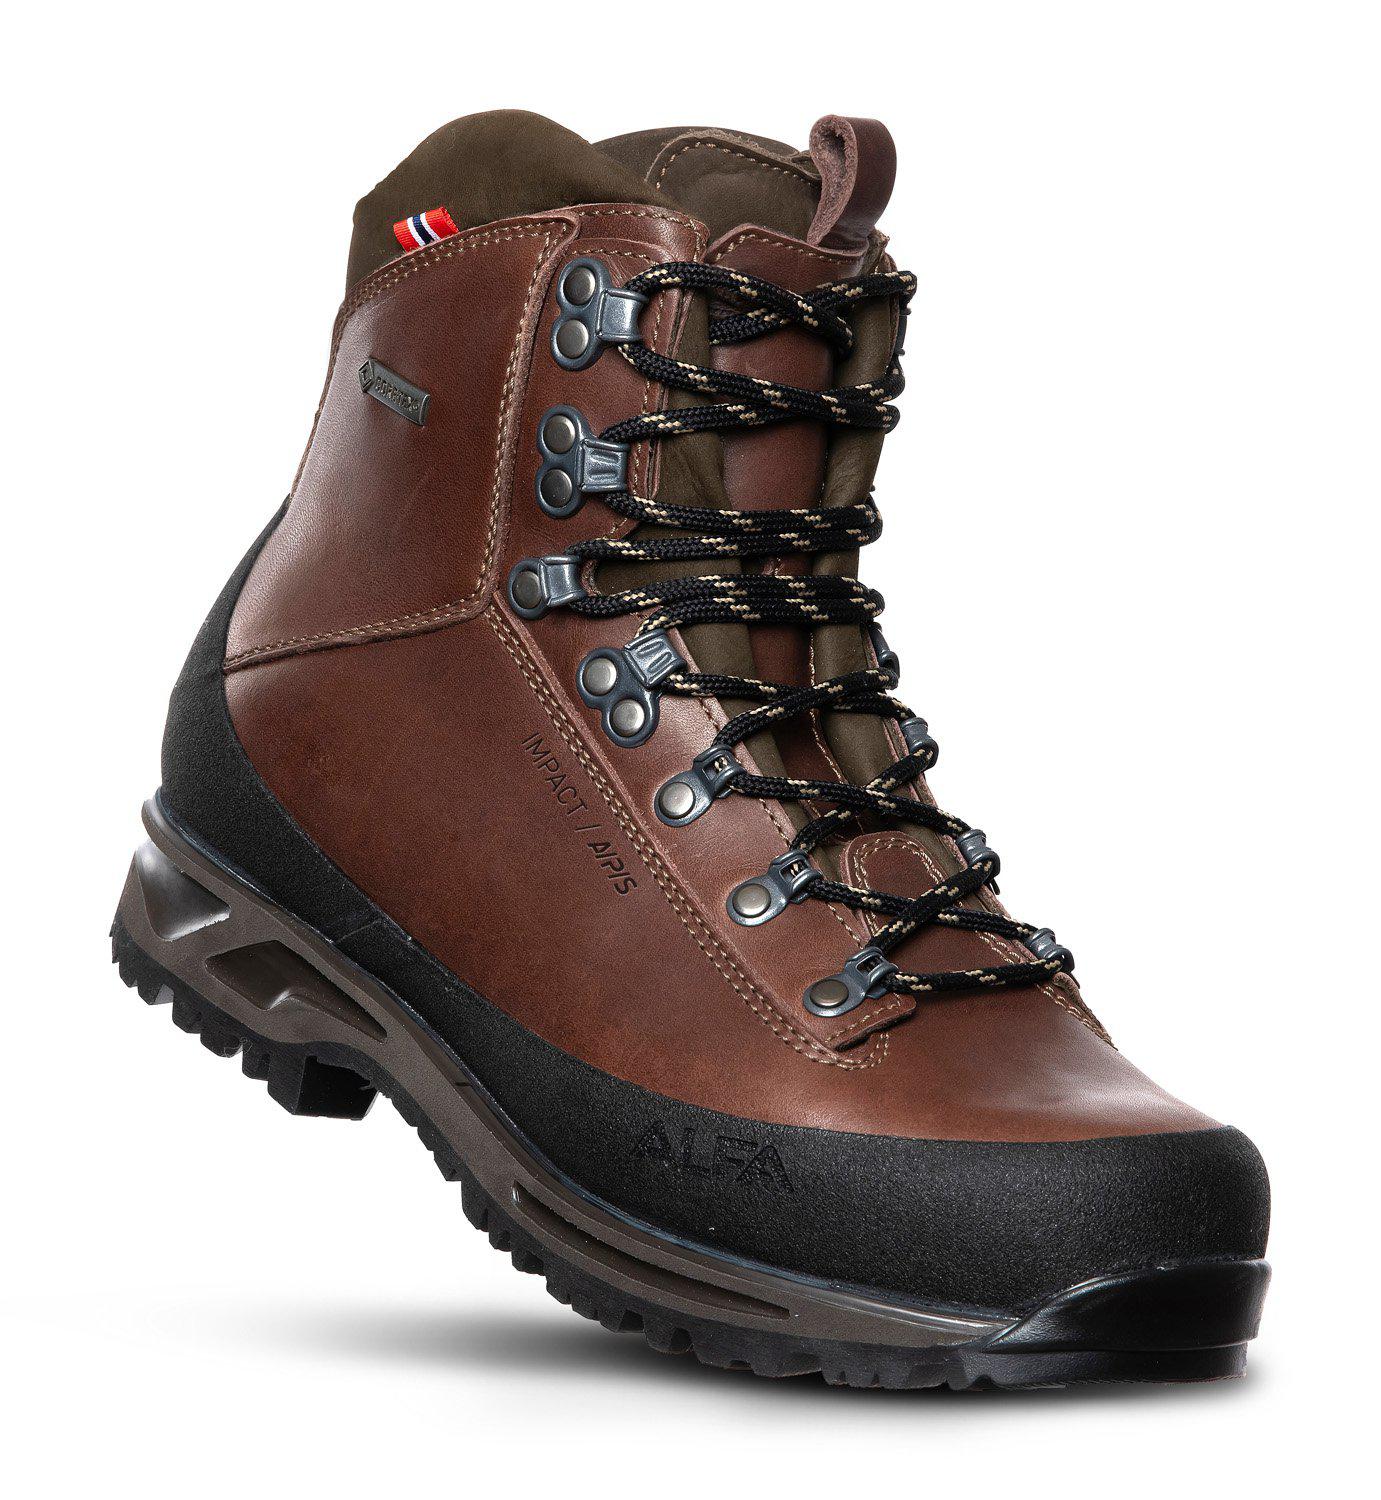 5835402220-impact_aps_gtx_w-classic_brown-front